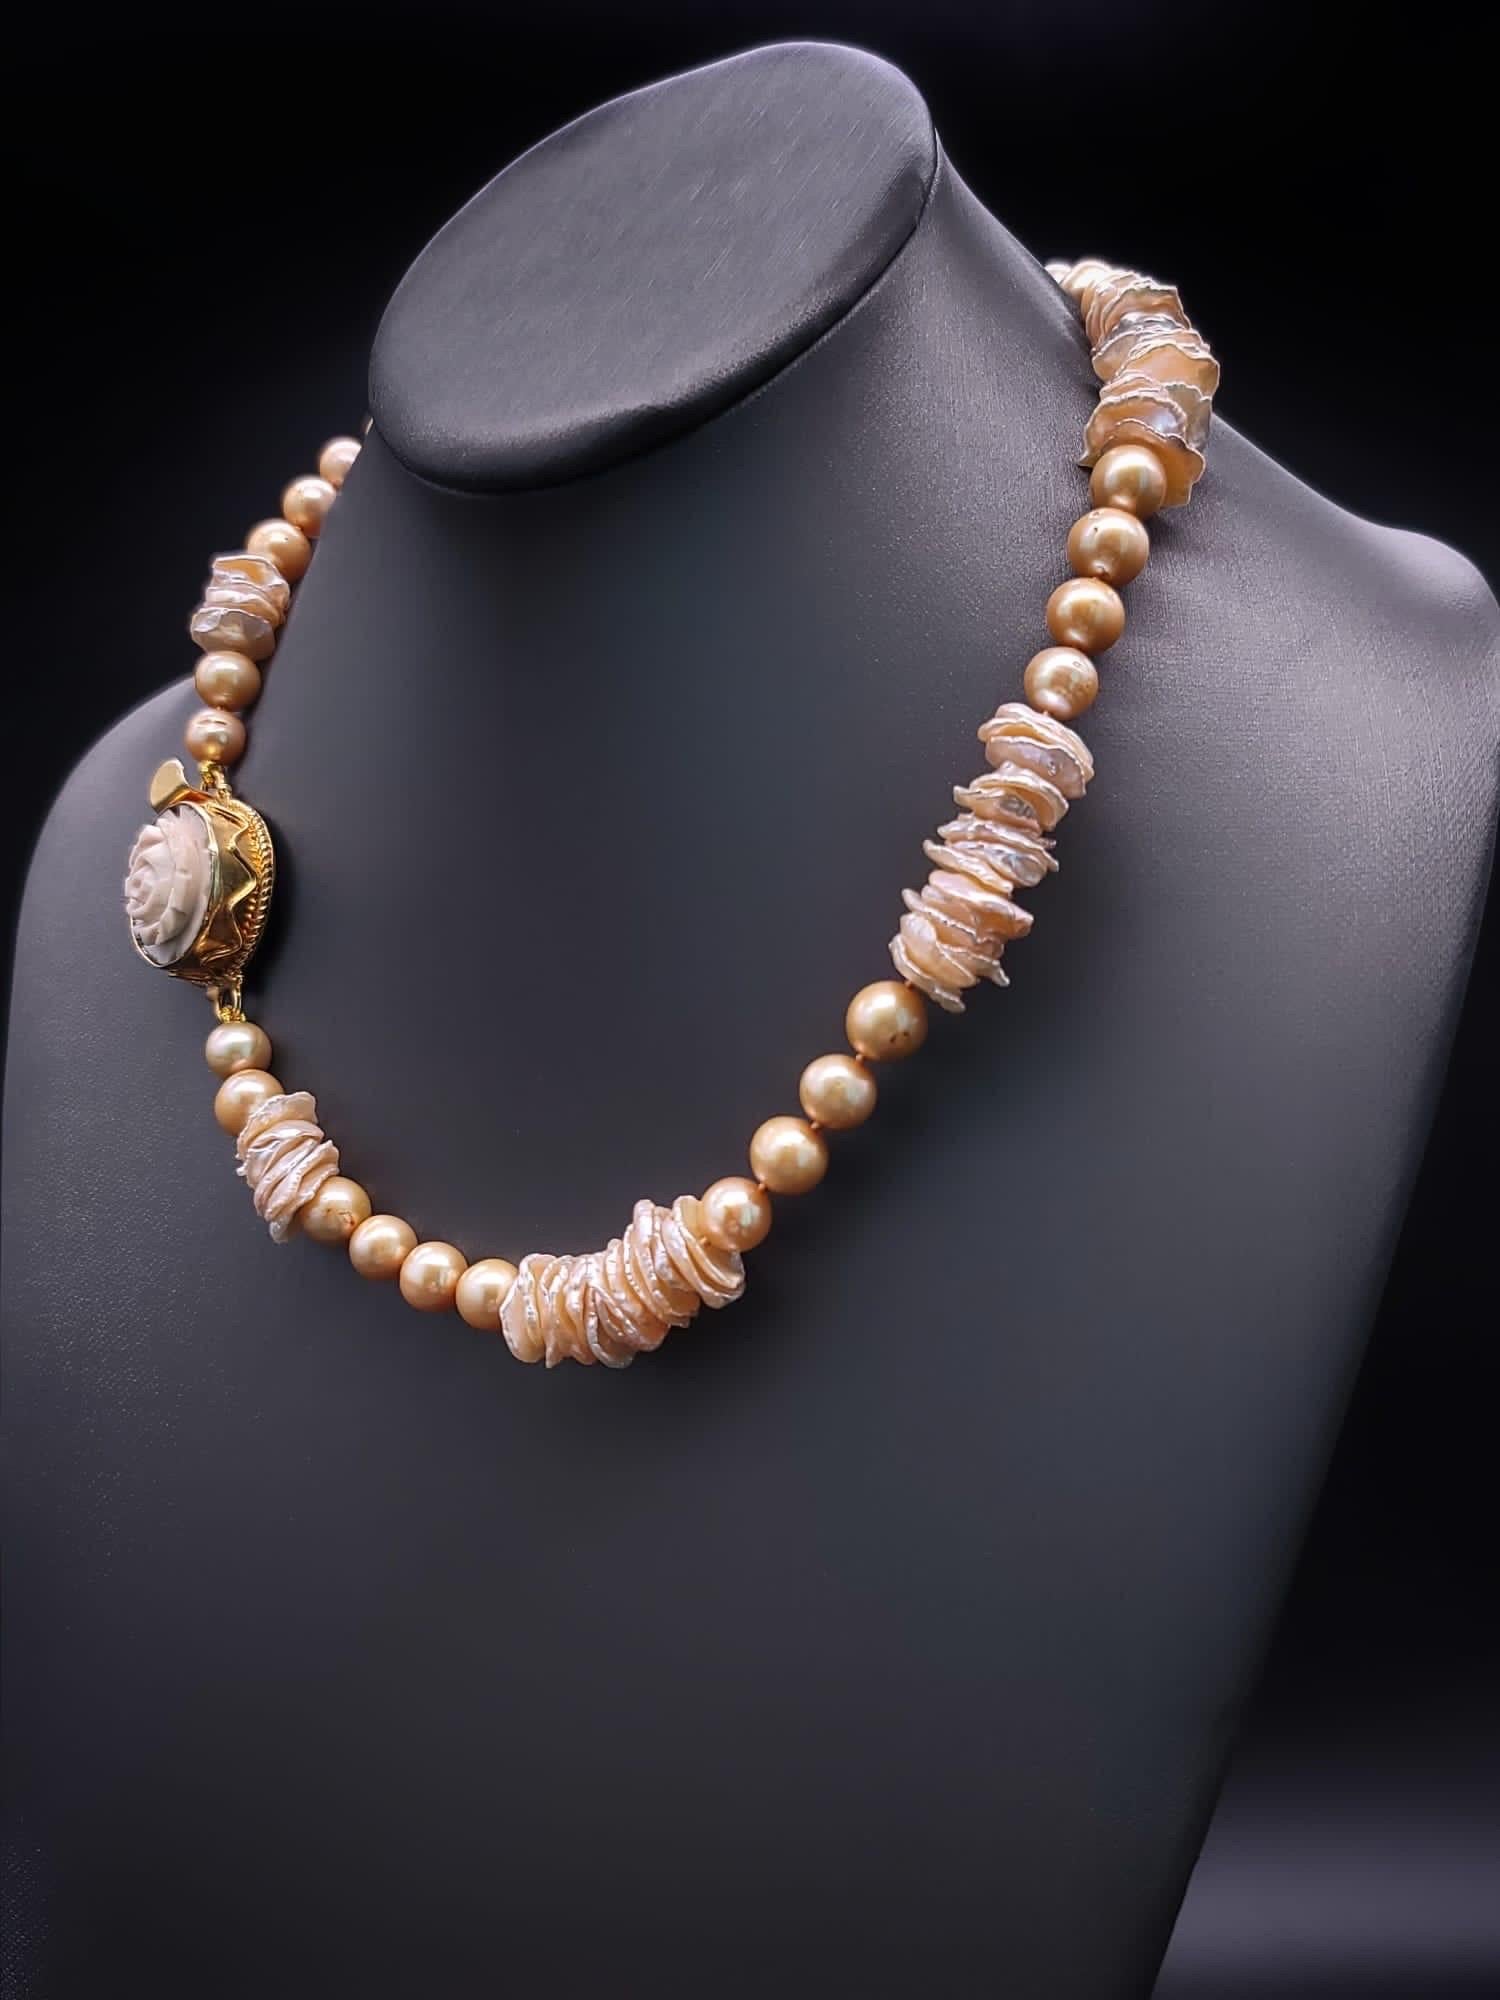  A Classic Fusion of Elegance and Uniqueness.

This stunning necklace is a timeless embodiment of grace, featuring lustrous freshwater gold pearls, each carefully selected to exude radiance and sophistication. Delicately interspersed are freshwater